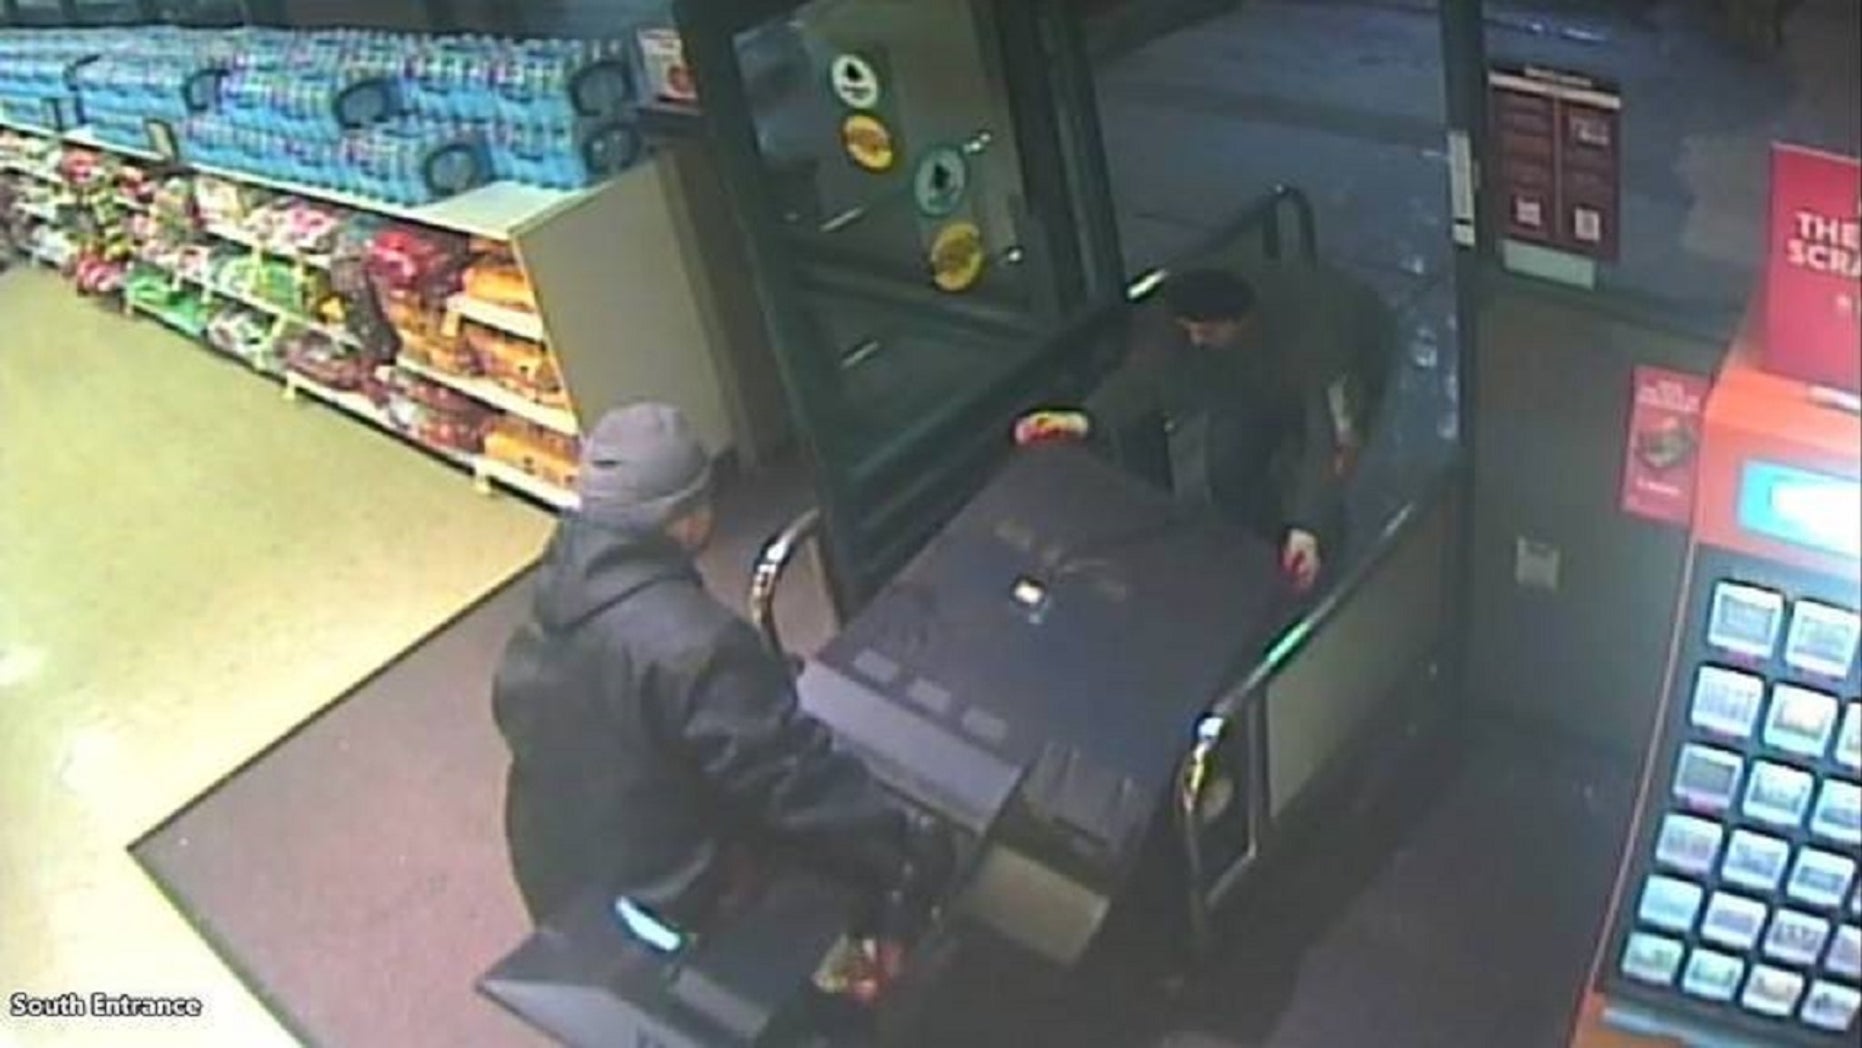 Suspects seen removing California Lottery kiosk from supermarket: police